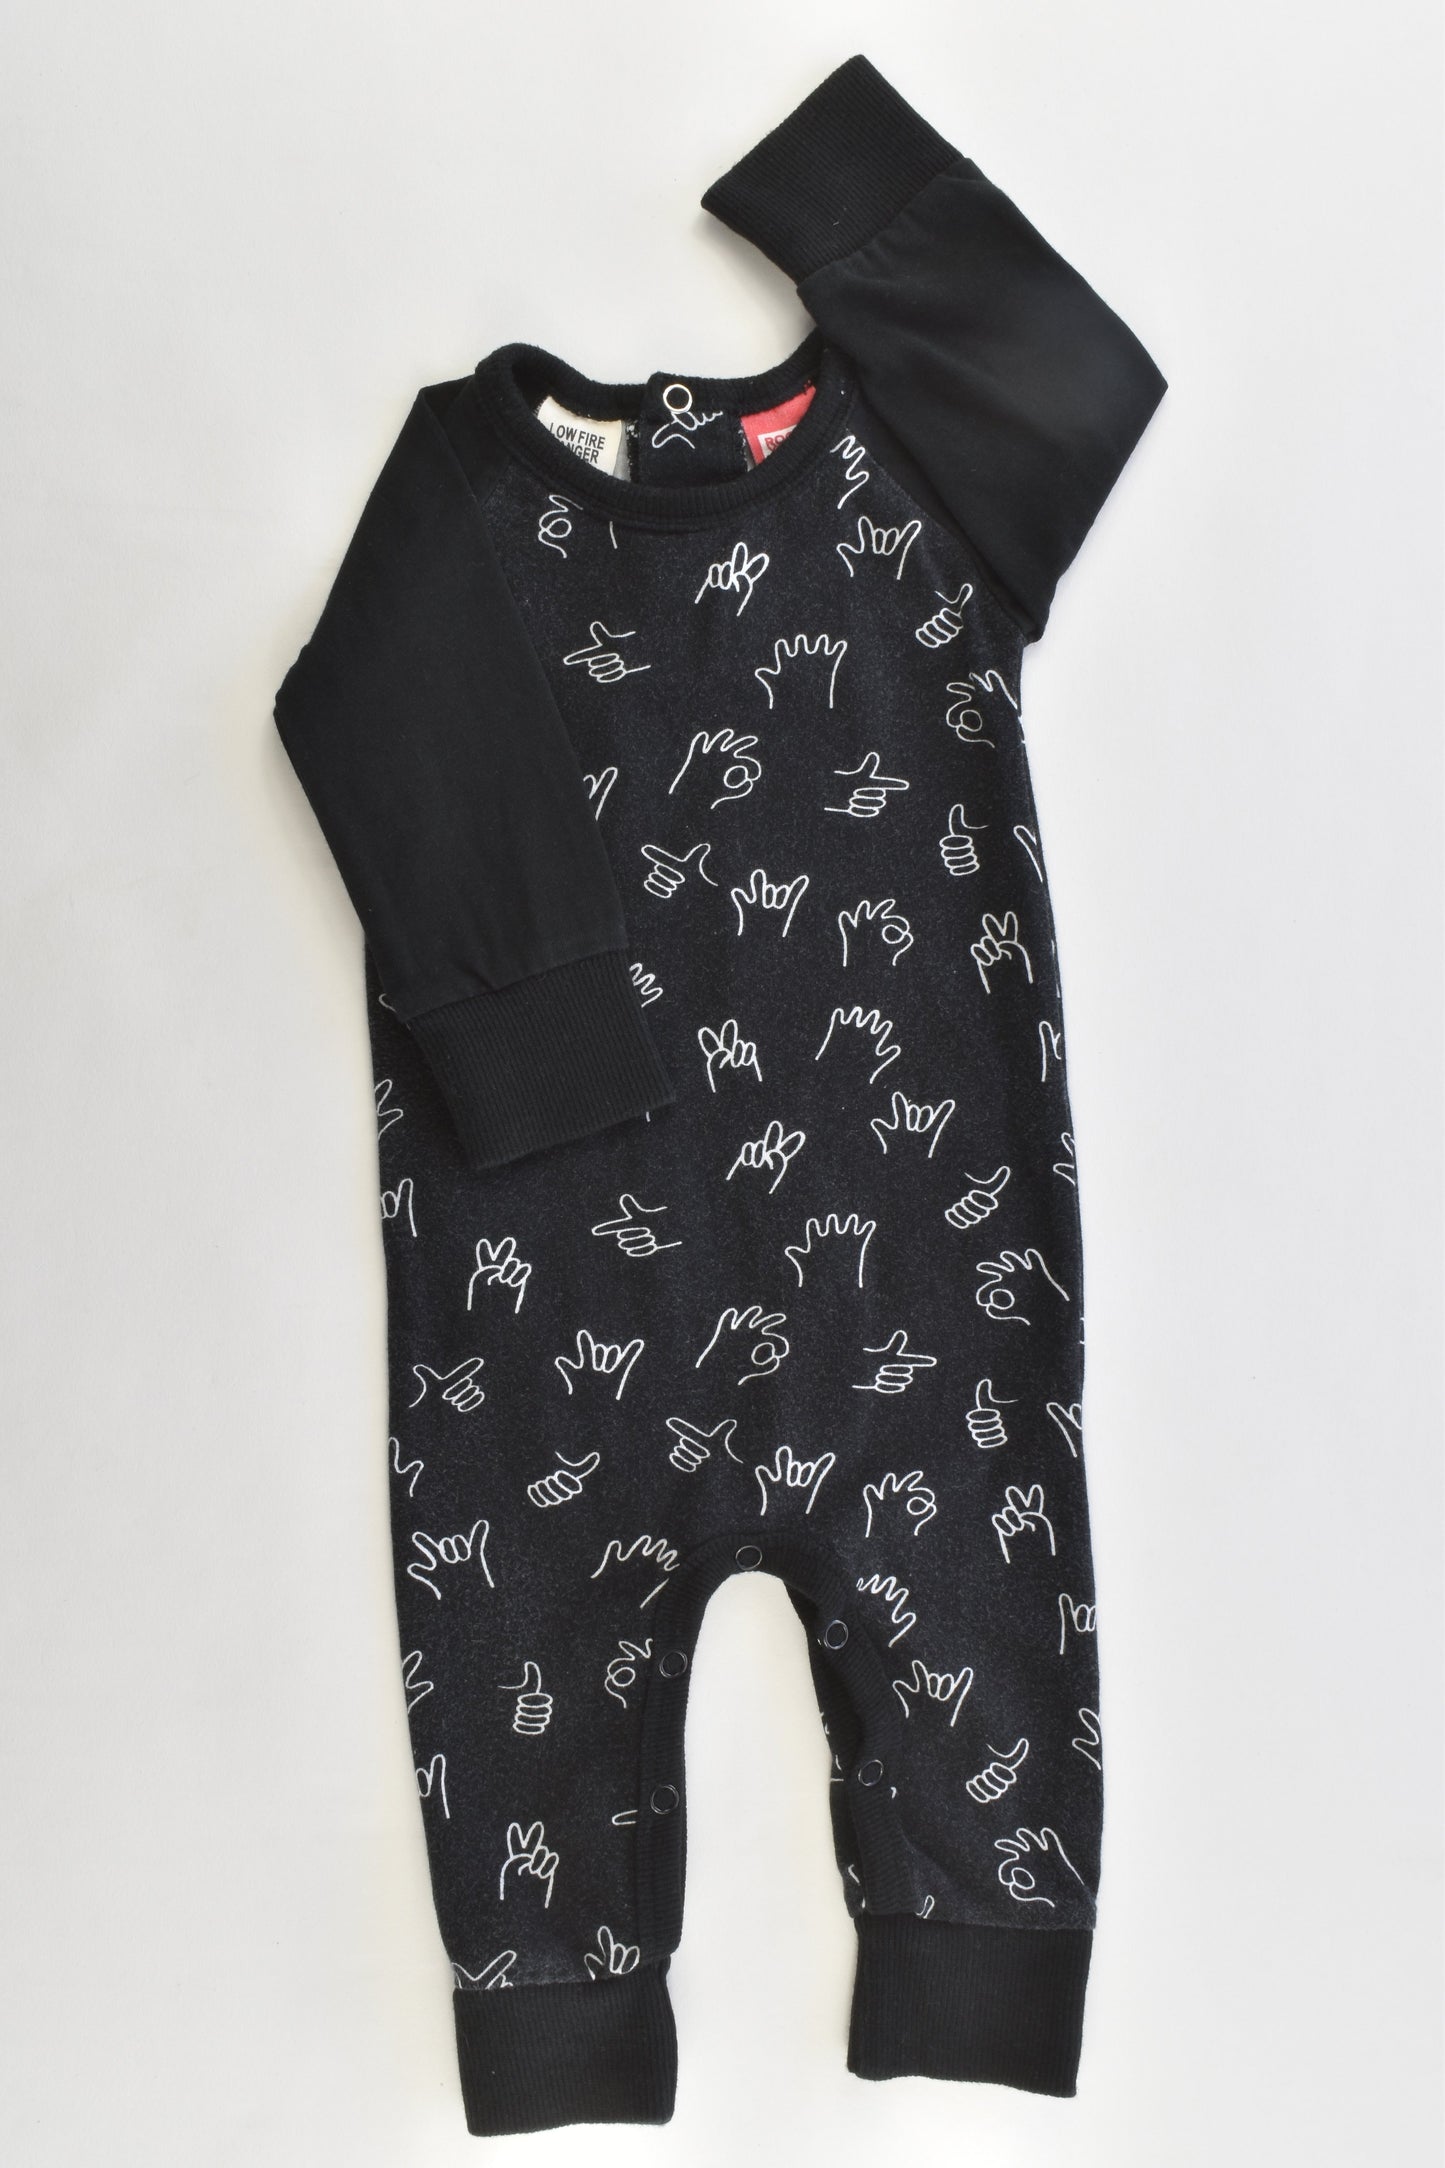 Rock Your Baby Size 000 (0-3 months) Romper